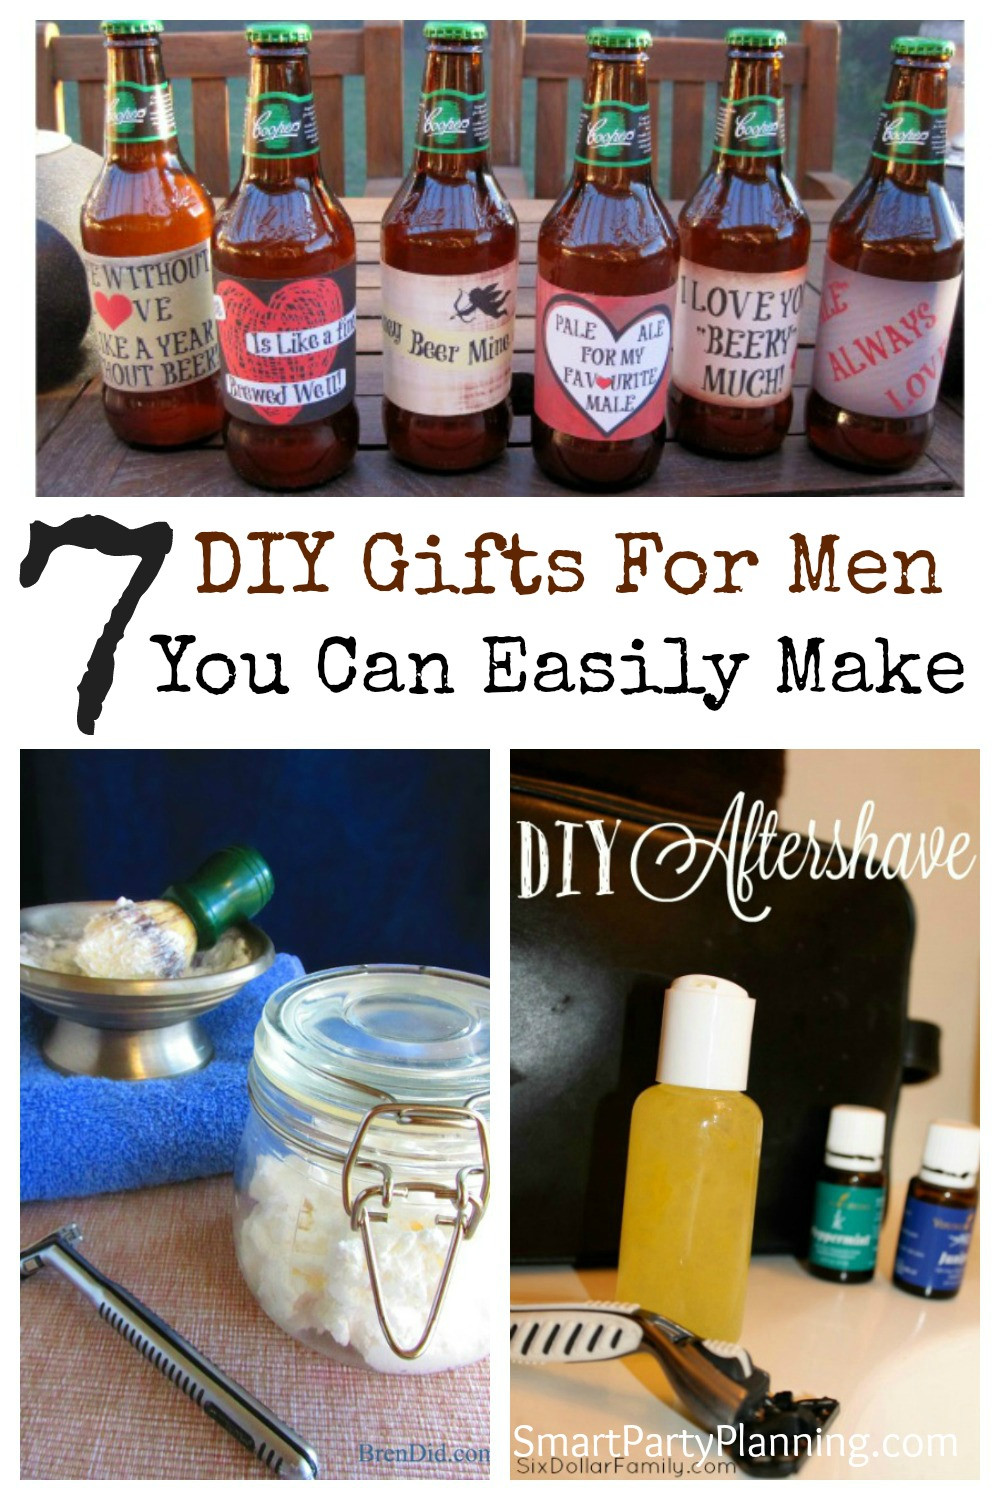 Cool Valentine Gift Ideas For Men
 7 DIY Gifts For Men You Can Easily Make